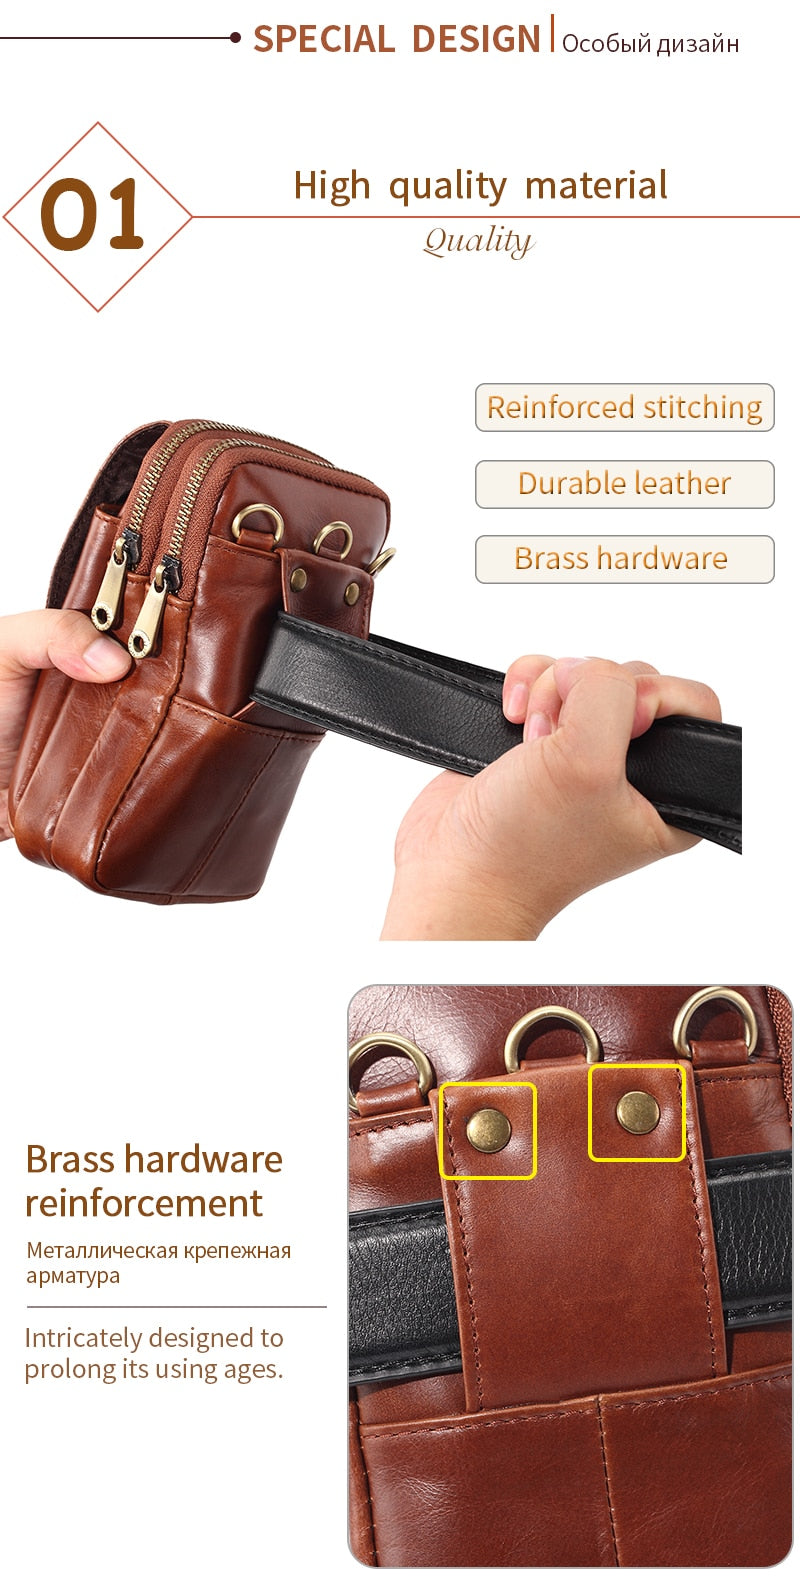 Small Genuine cowhide leather Men's Shoulder Bag Clutch Hangbag Messenger Male Bags Crossbody Sling Tote Small Zipper Belt Bags